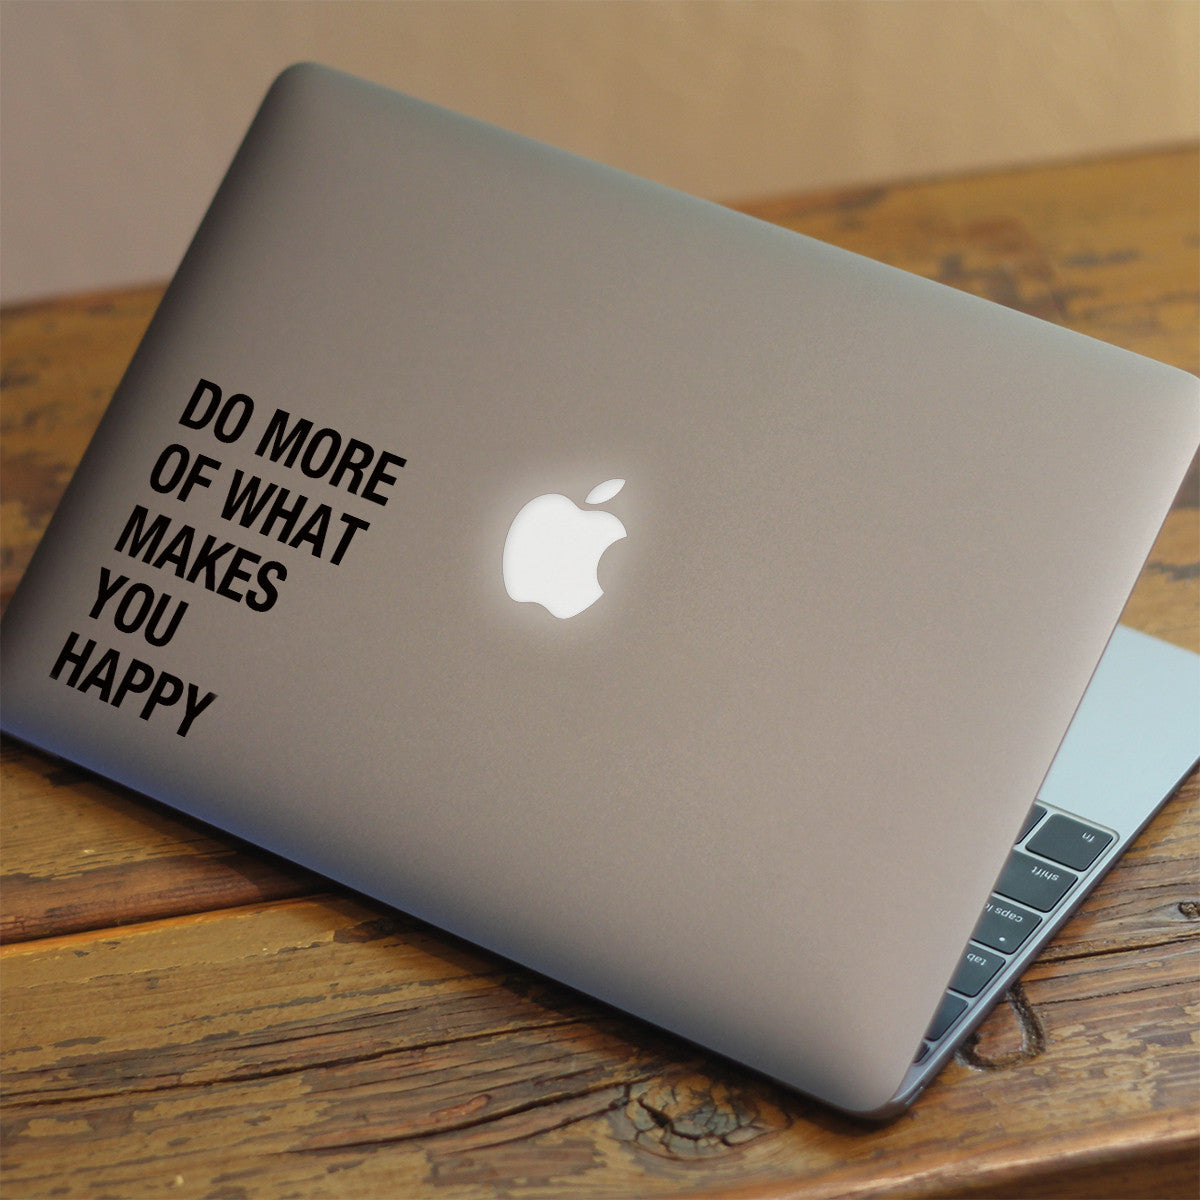 Makes you Happy Macbook Decal